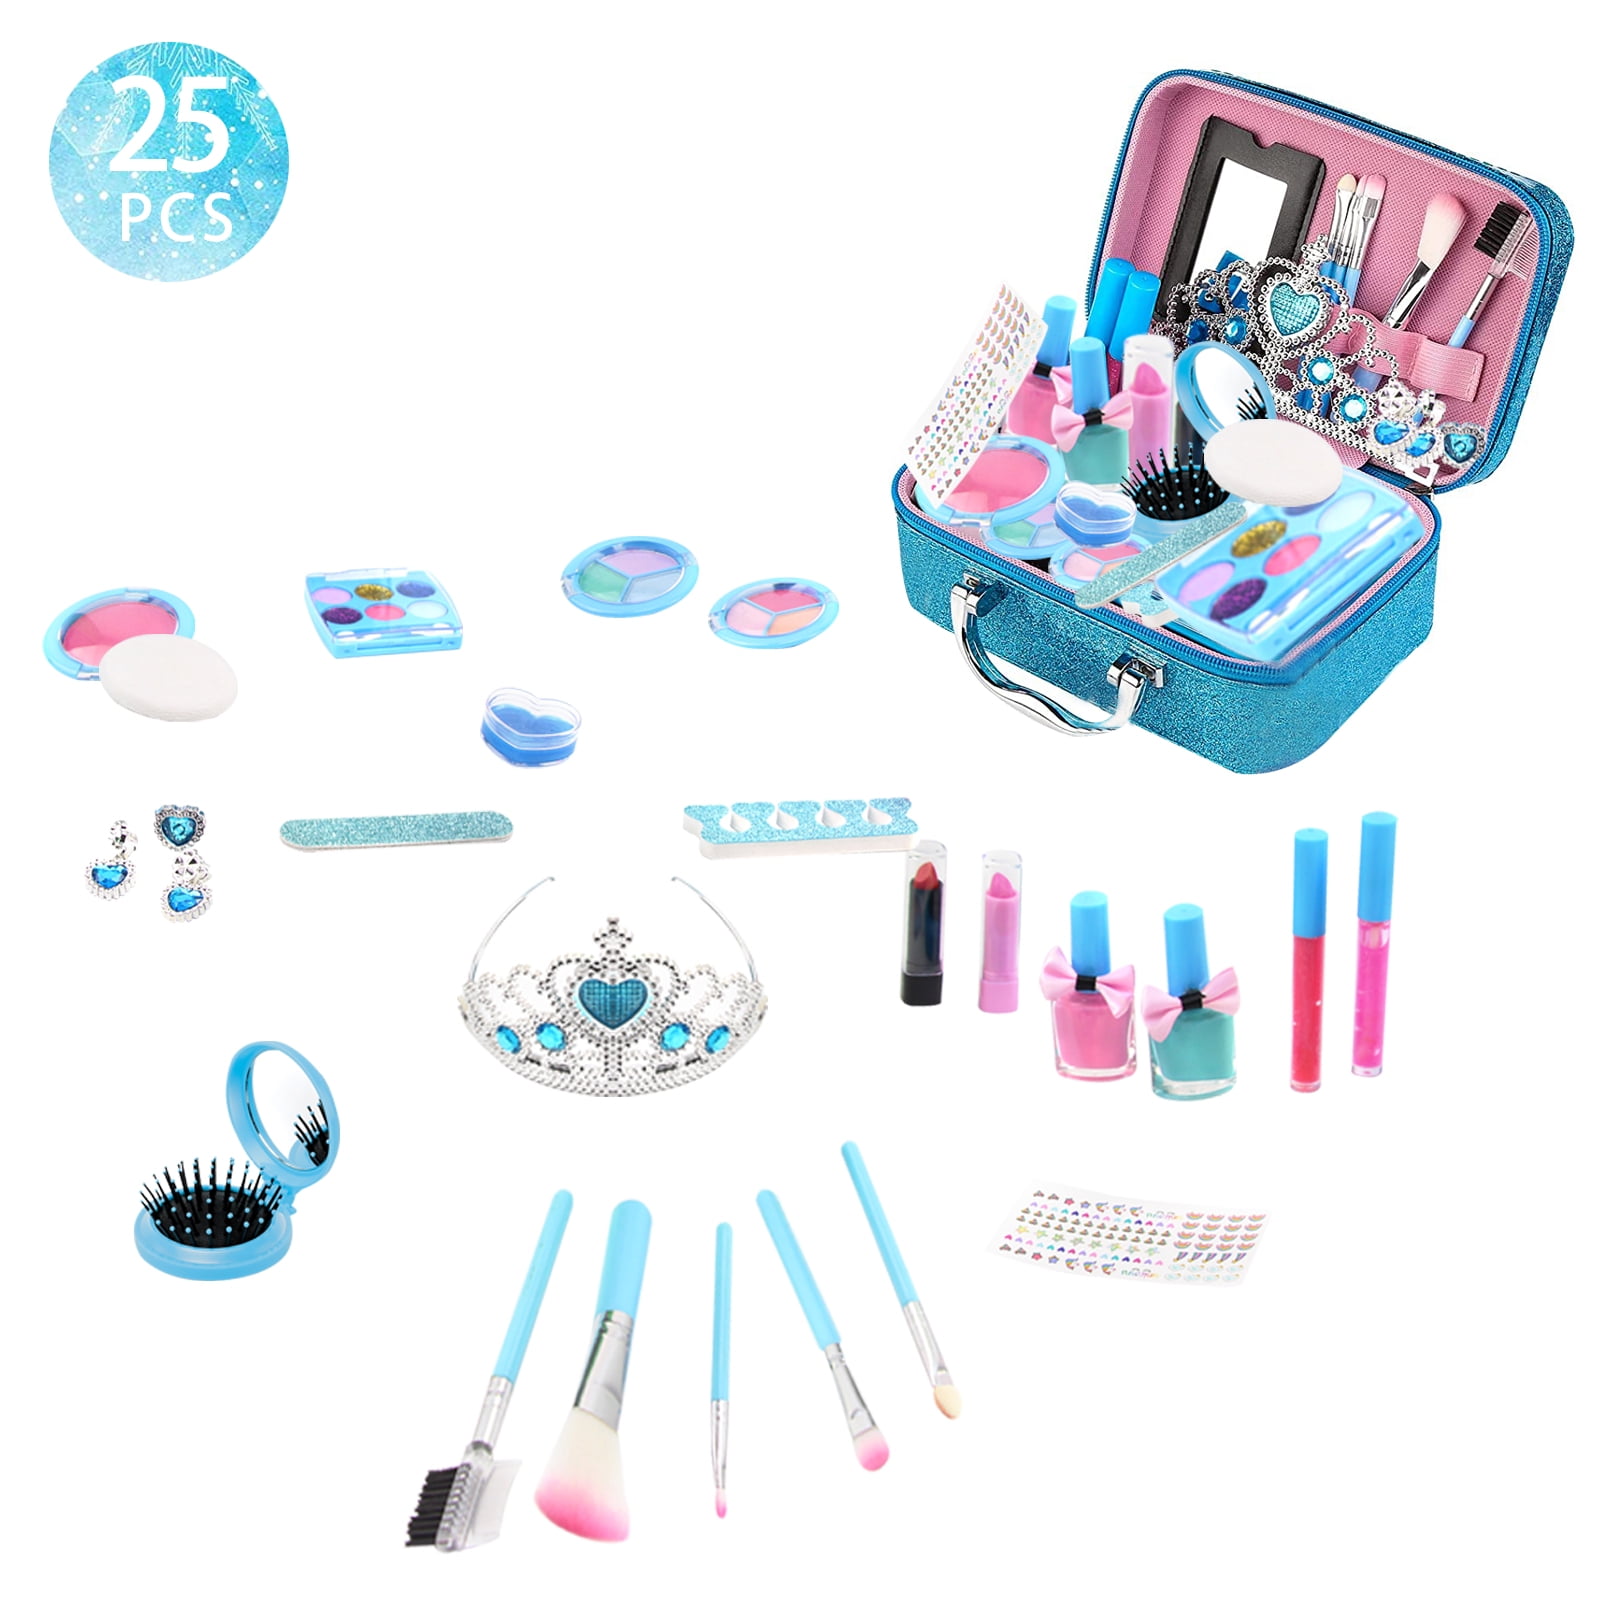 GIFTINBOX Kids Makeup kit for Girls, 25 PCS Real Makeup Set, Washable  Makeup Set Toy with Cosmetic Case, Non-Toxic Little Girls Makeup Kit,  Pretend